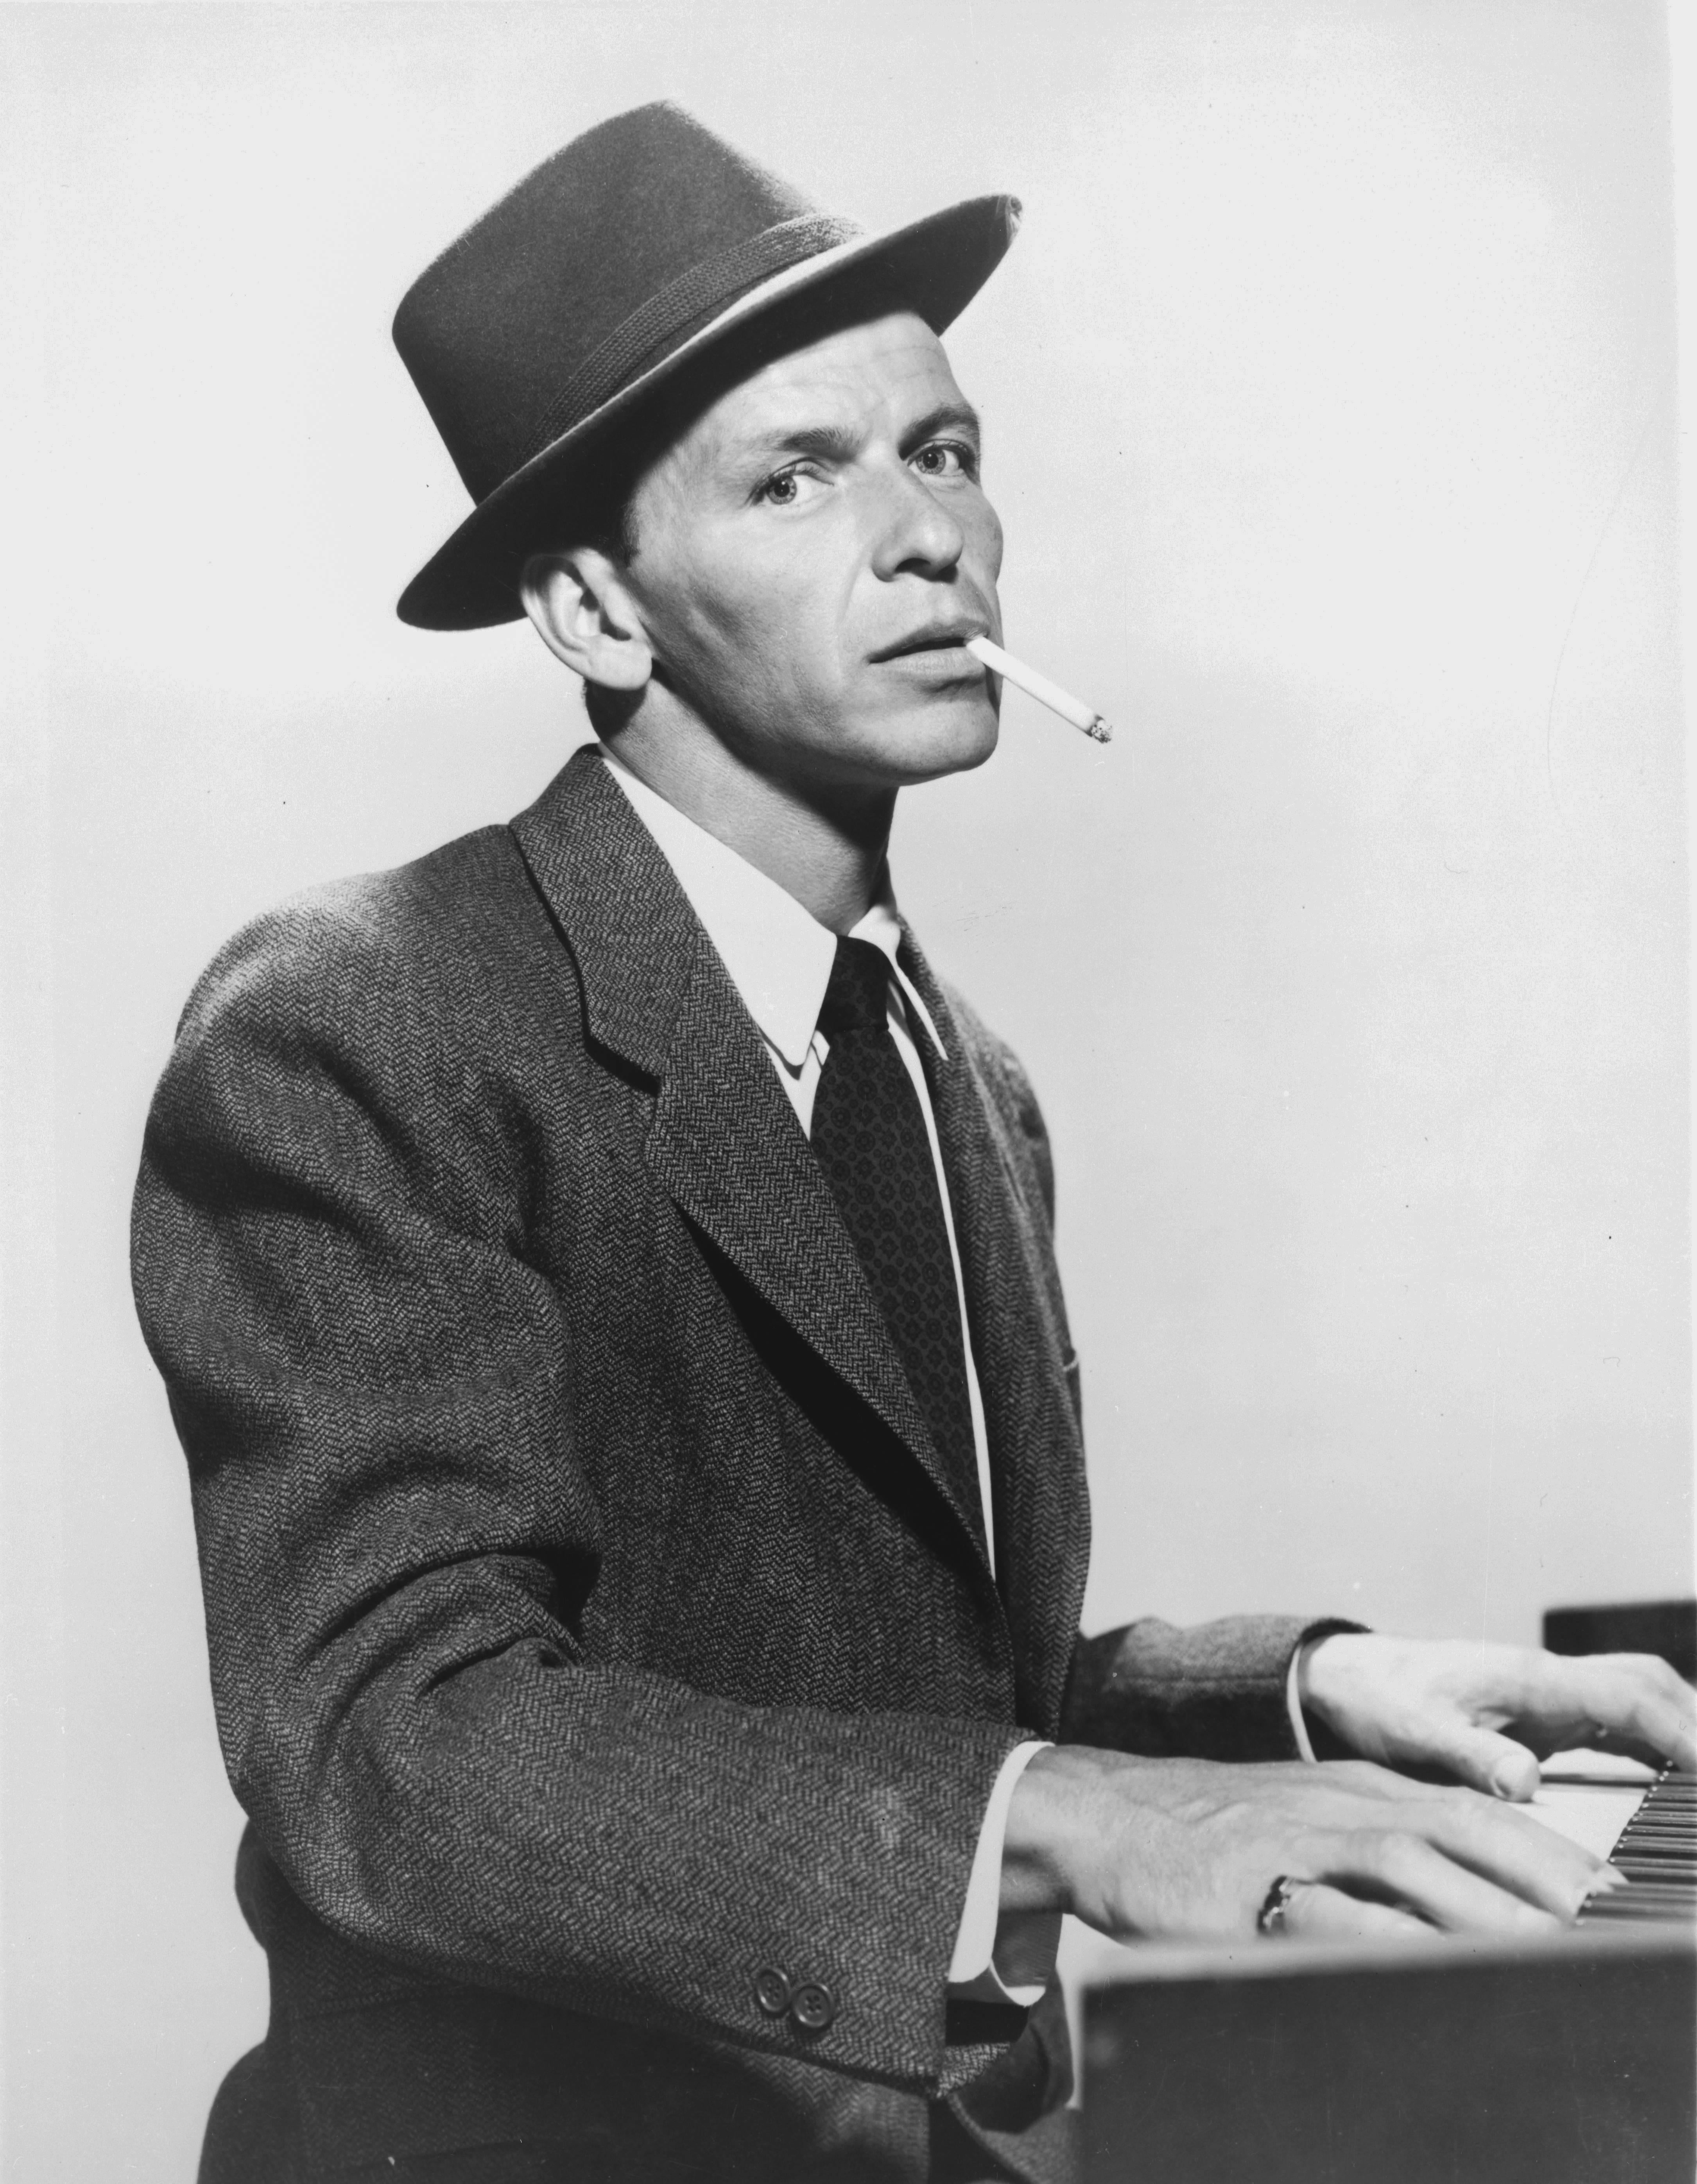 Unknown Portrait Photograph - Frank Sinatra Playing Piano and Smoking a Cigarette Fine Art Print